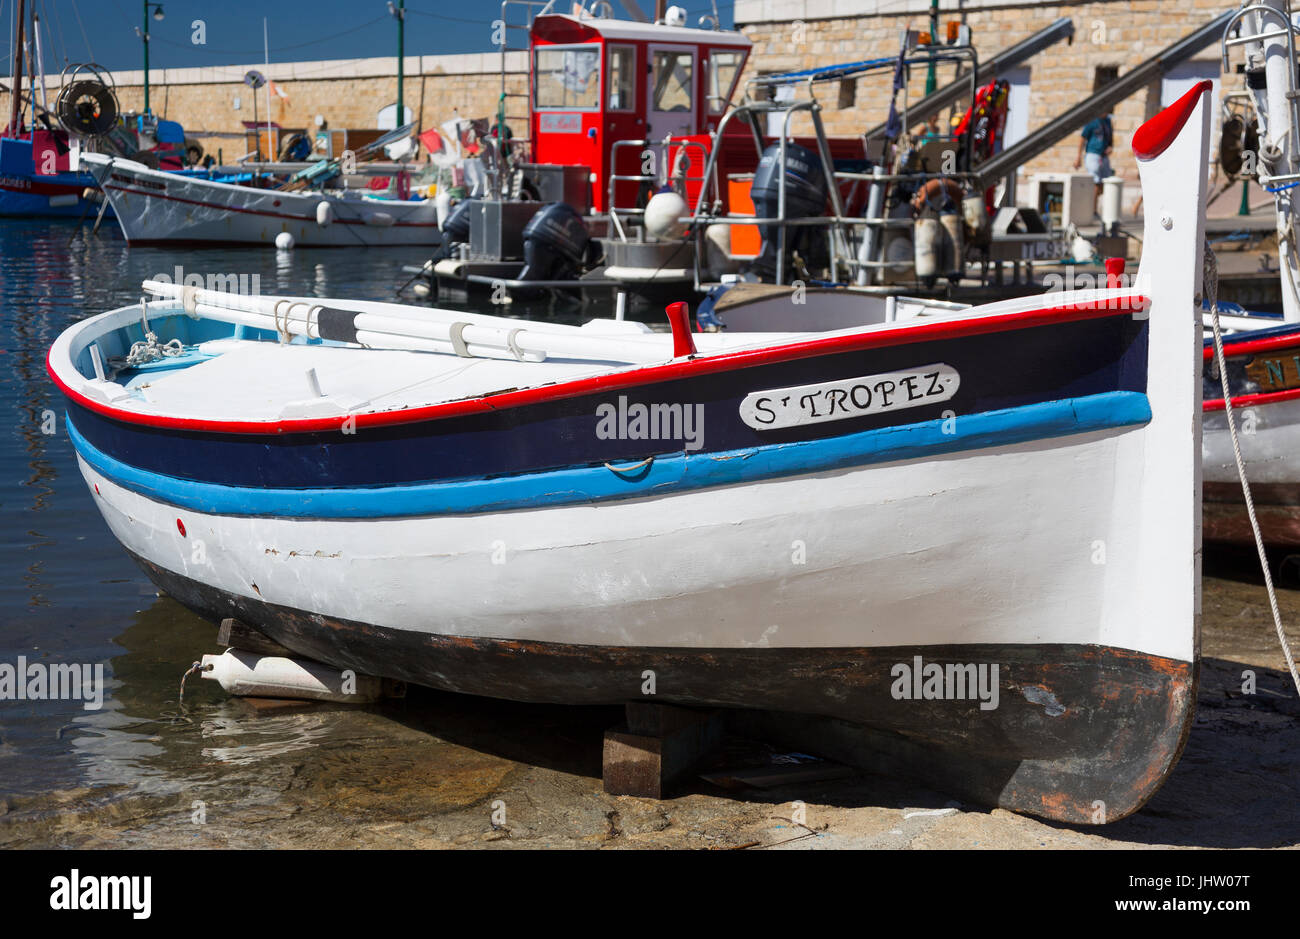 Brightly coloured wooden fishing boat at Saint-Tropez, France. Stock Photo